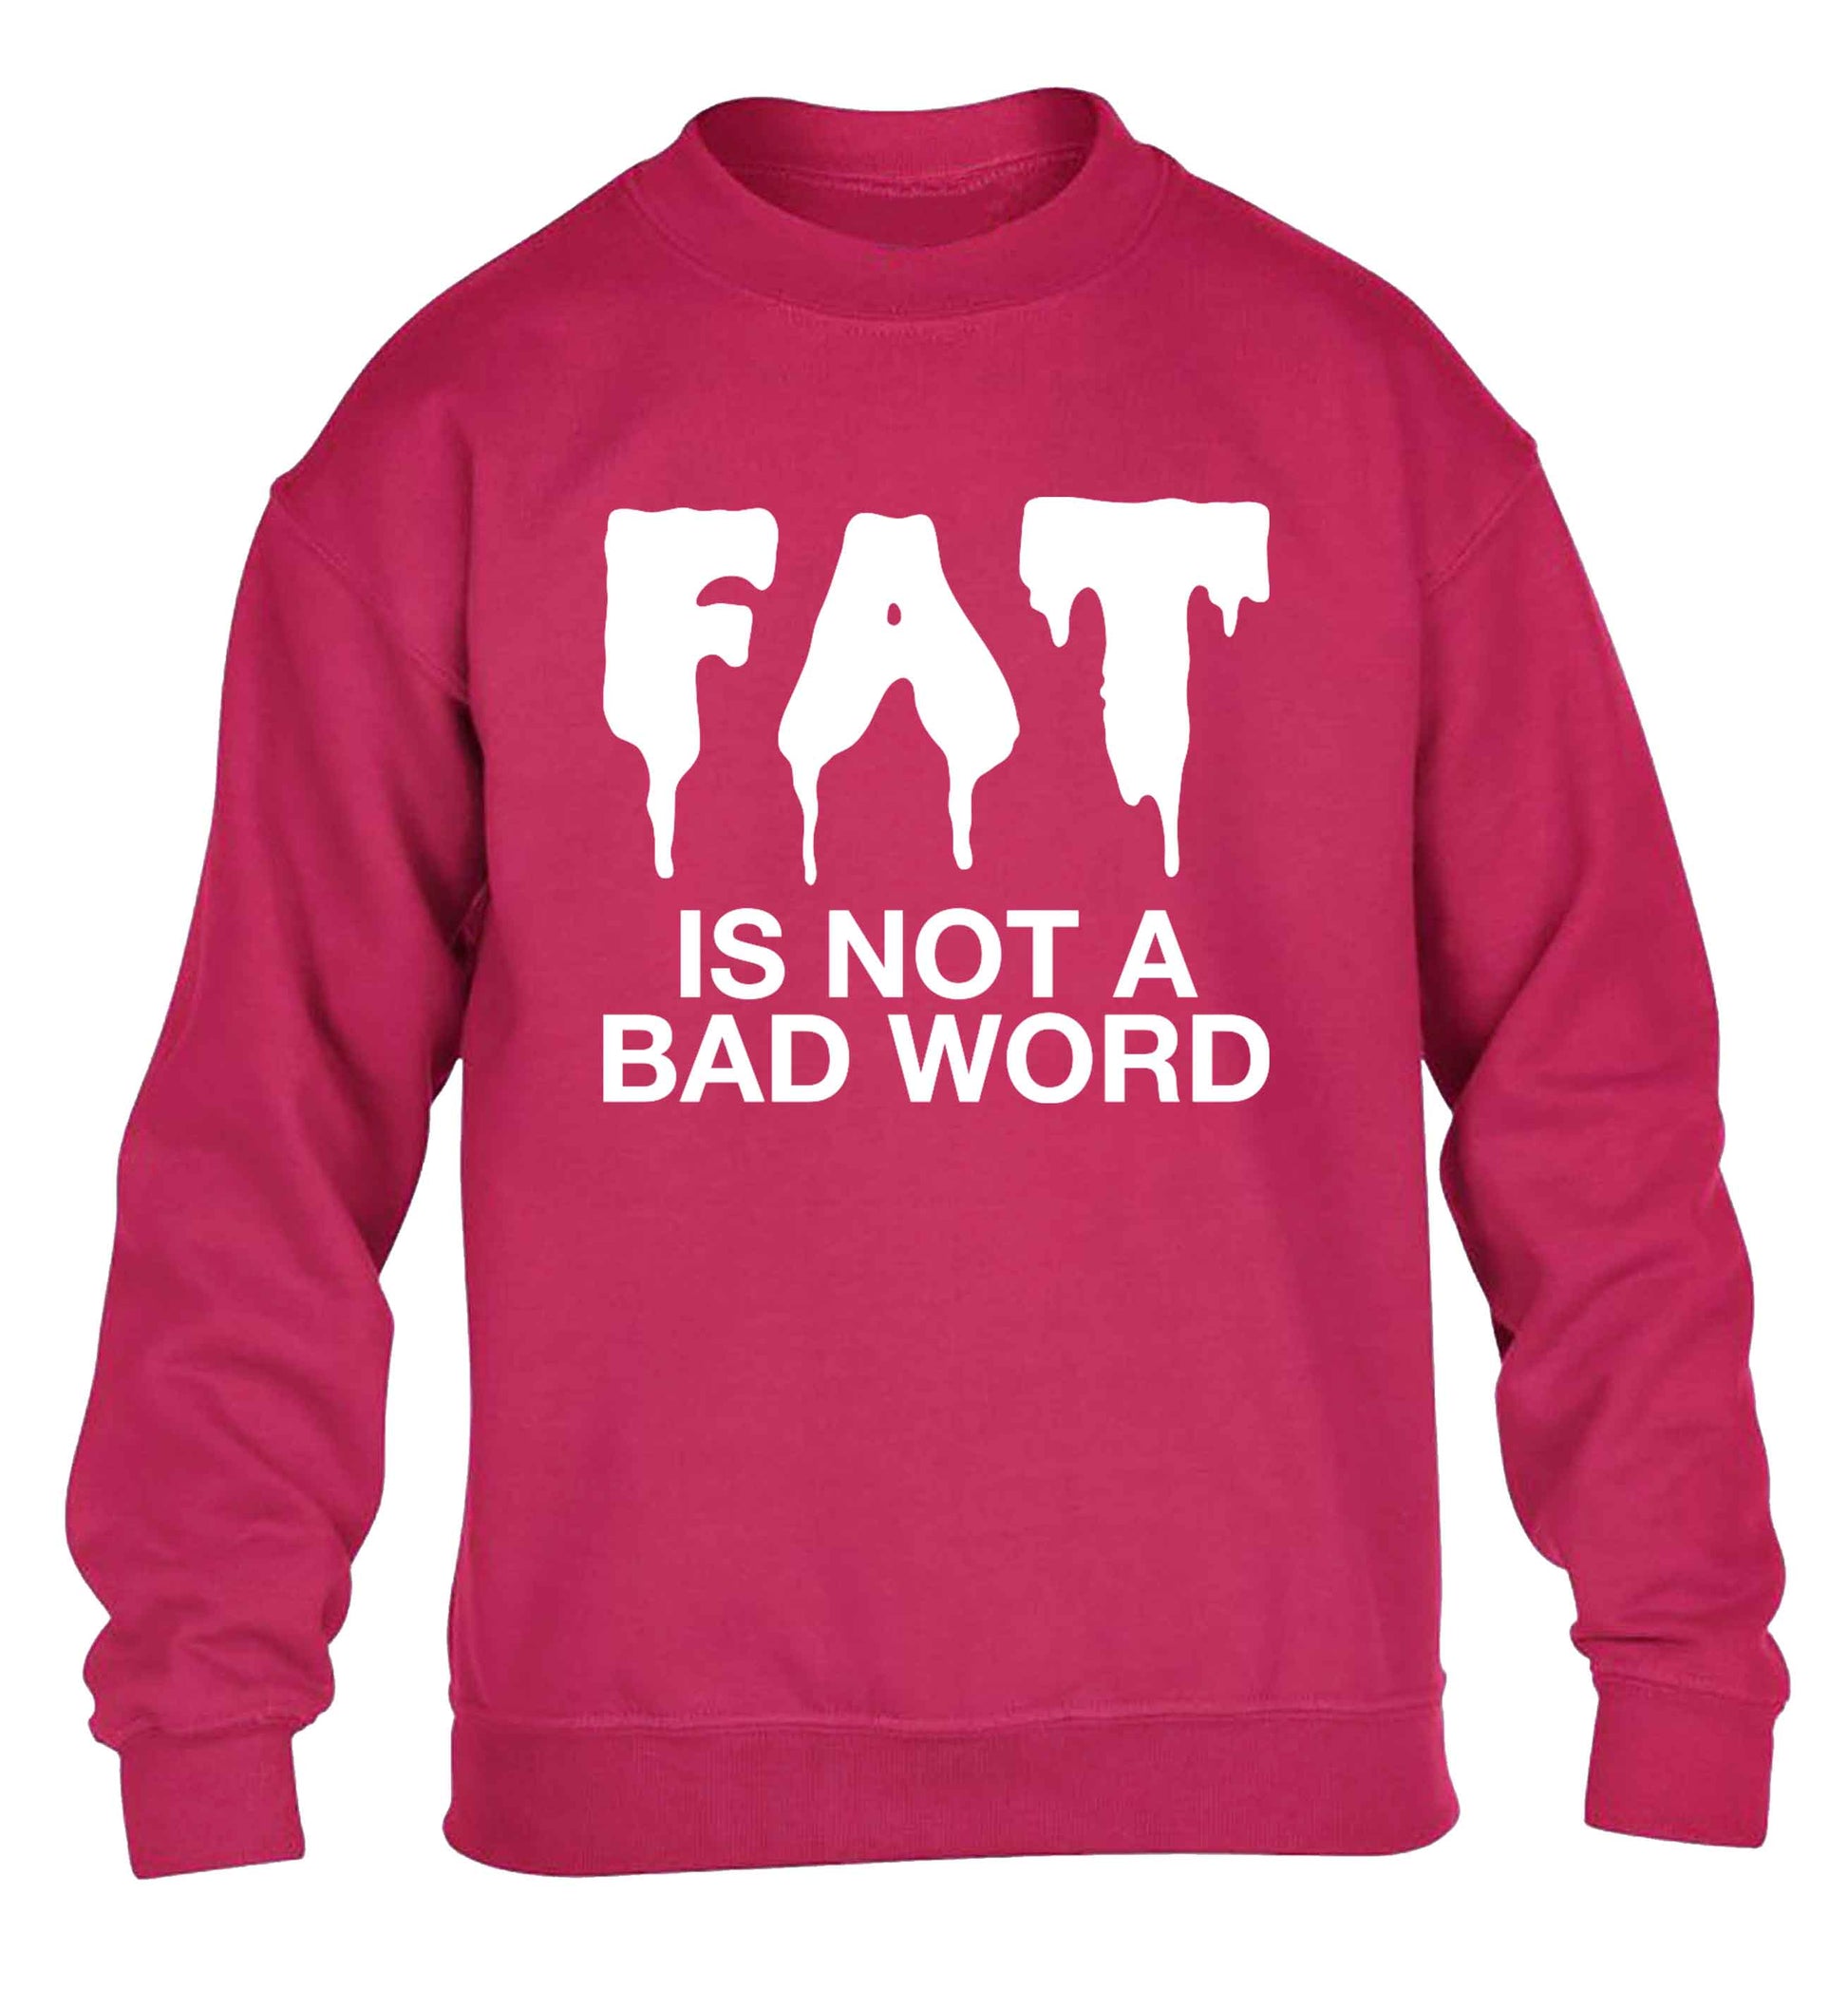 Fat is not a bad word children's pink sweater 12-13 Years